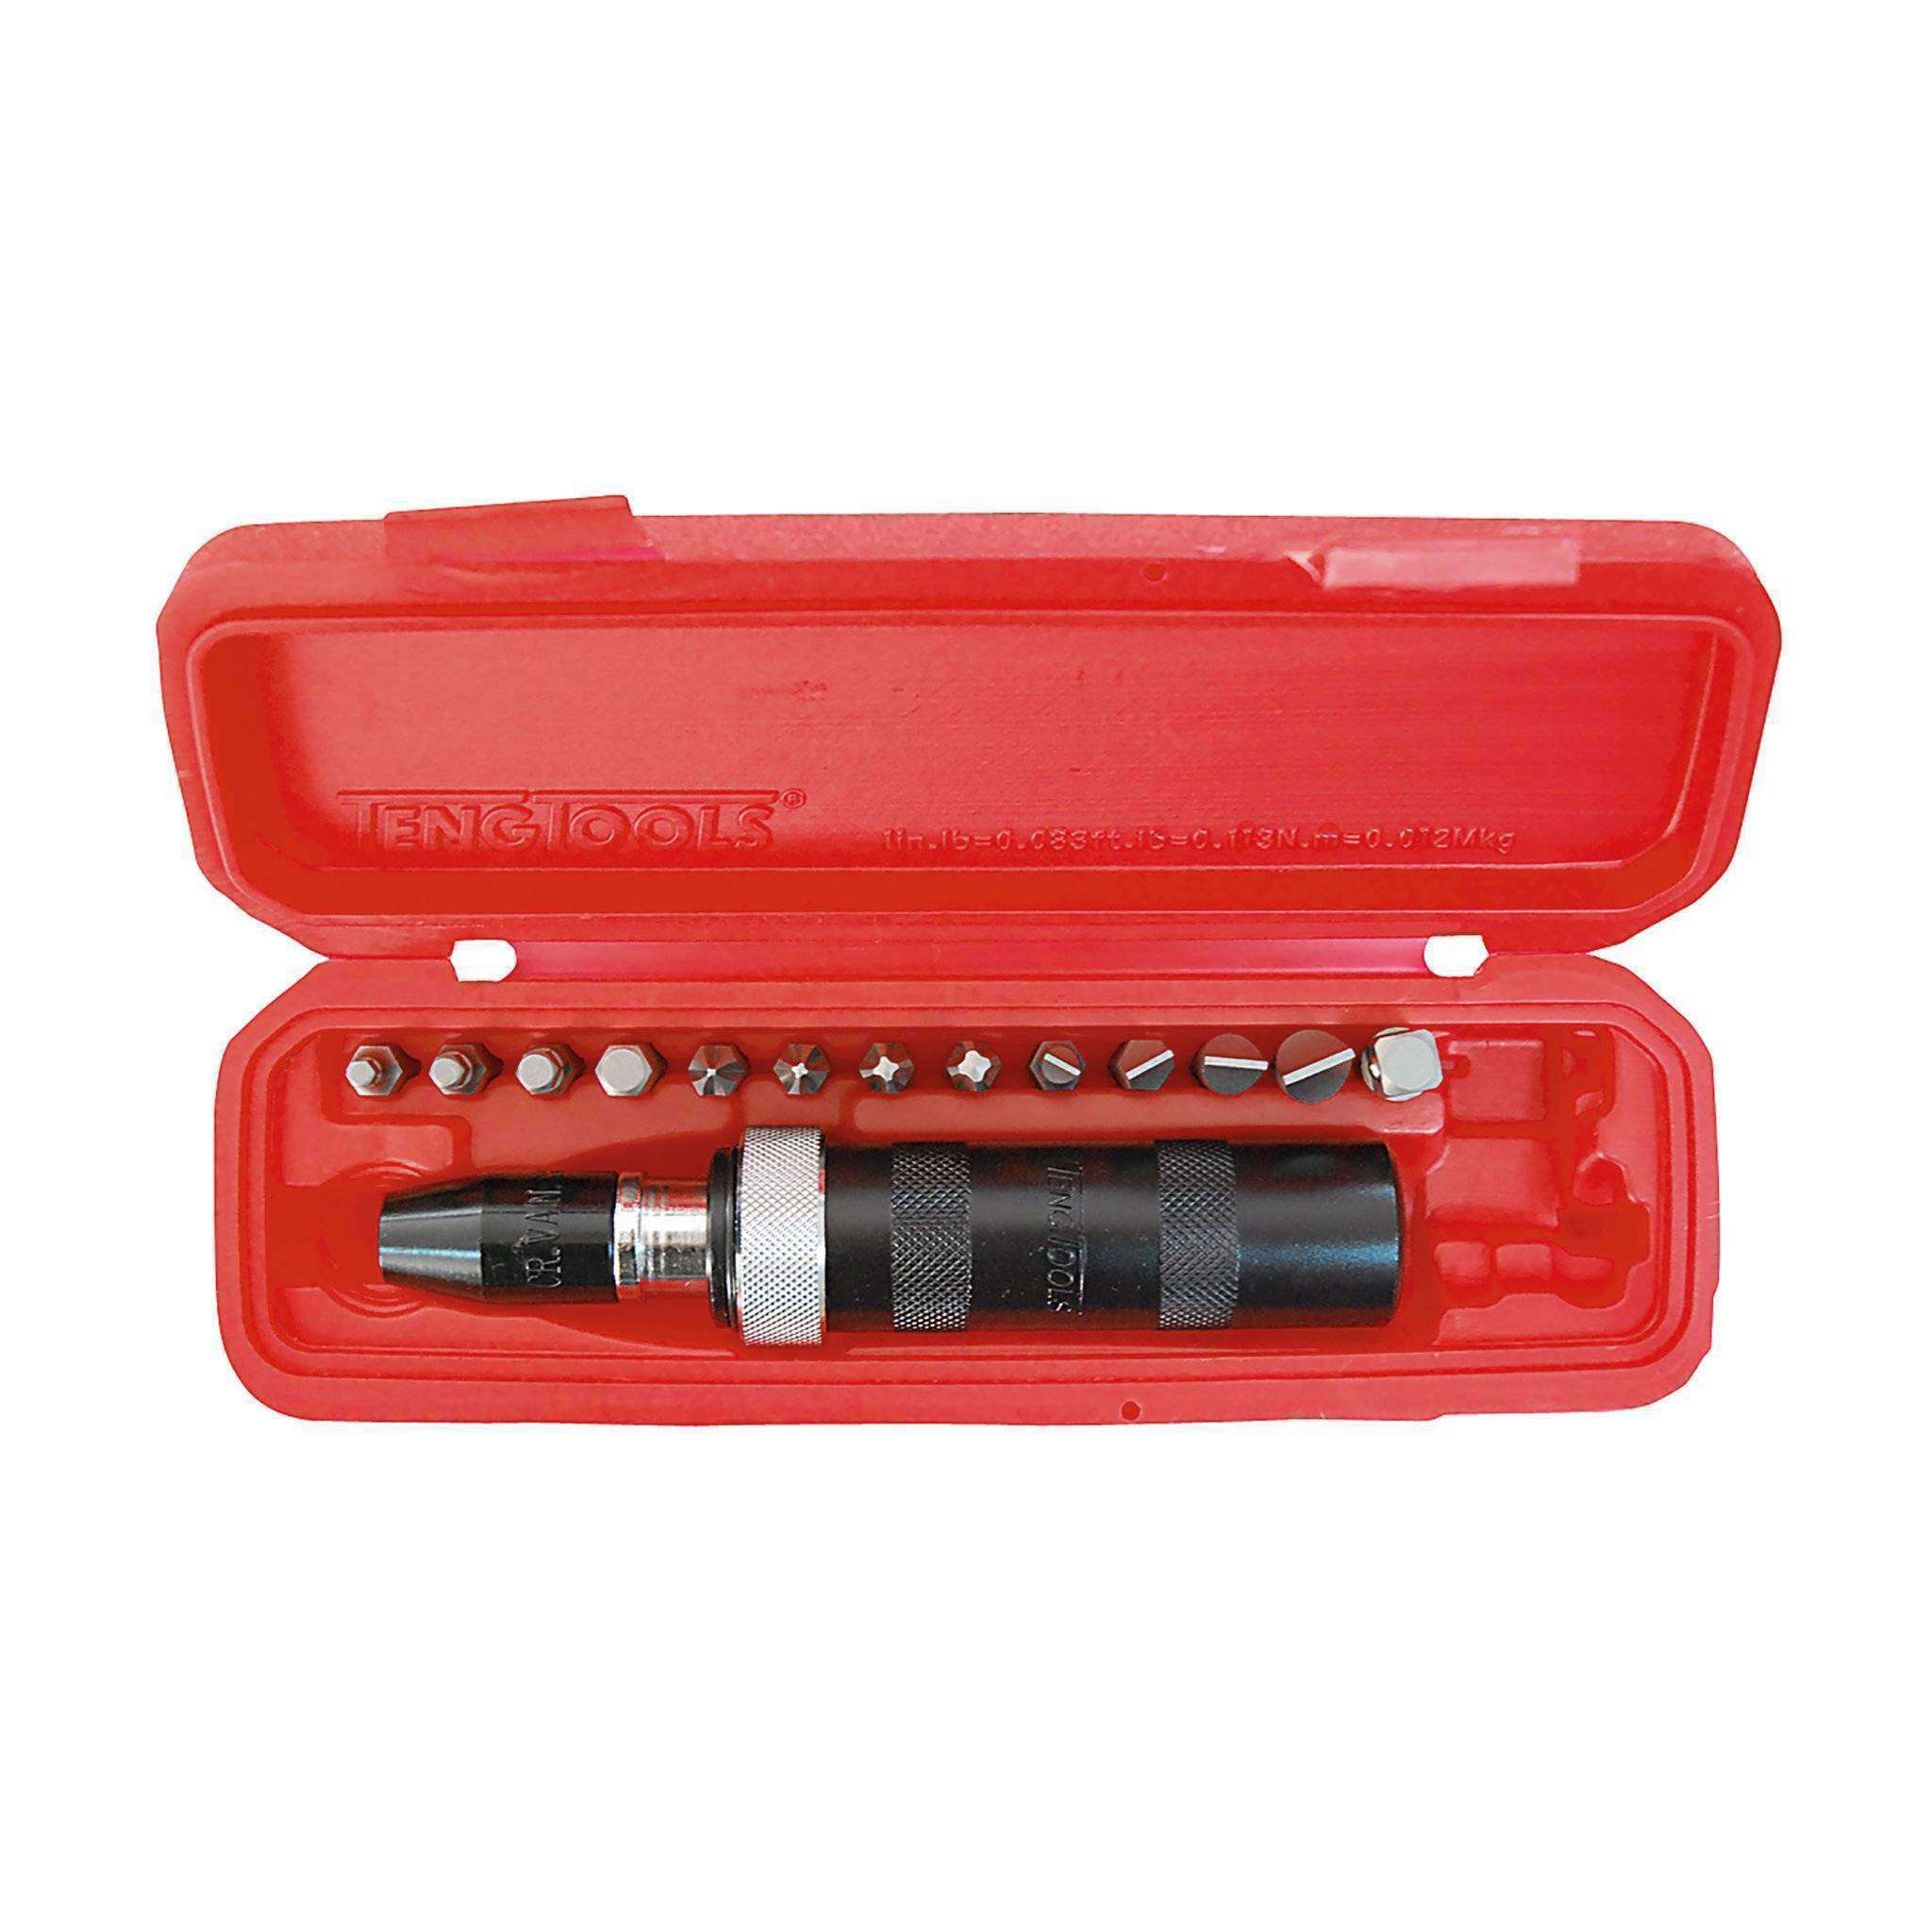 Teng Tools 15 Piece 1/2 Inch Drive Reversible Impact Driver Set - ID515